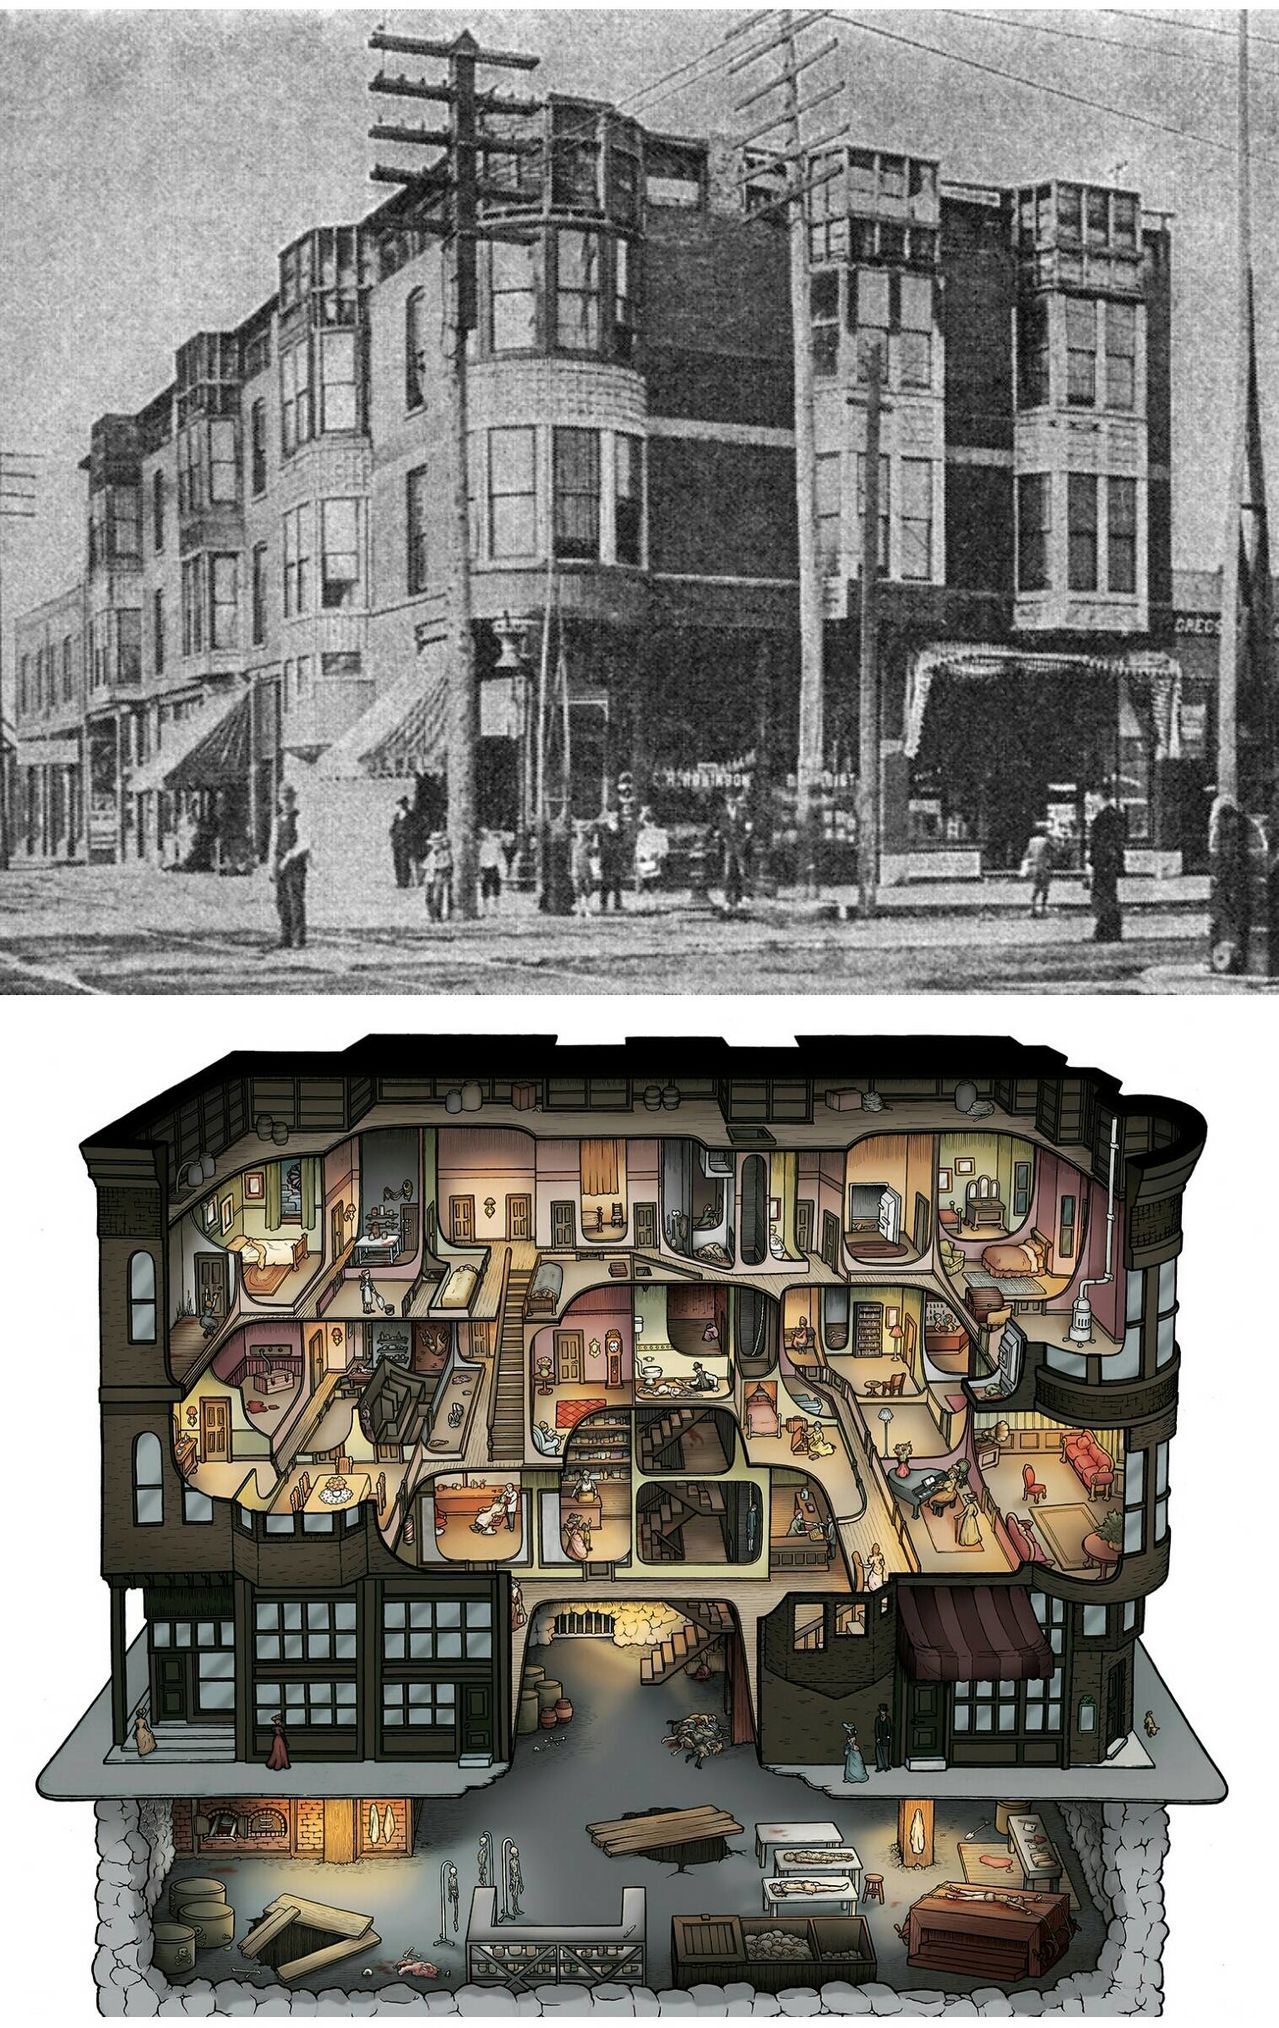 A picture and diagram of H. H. Holmes’ murder hotel, a specially designed building for killing. It contained gas chambers, torture rooms, secret passages, trap doors and ovens. It is estimated he killed 200 people in this building)